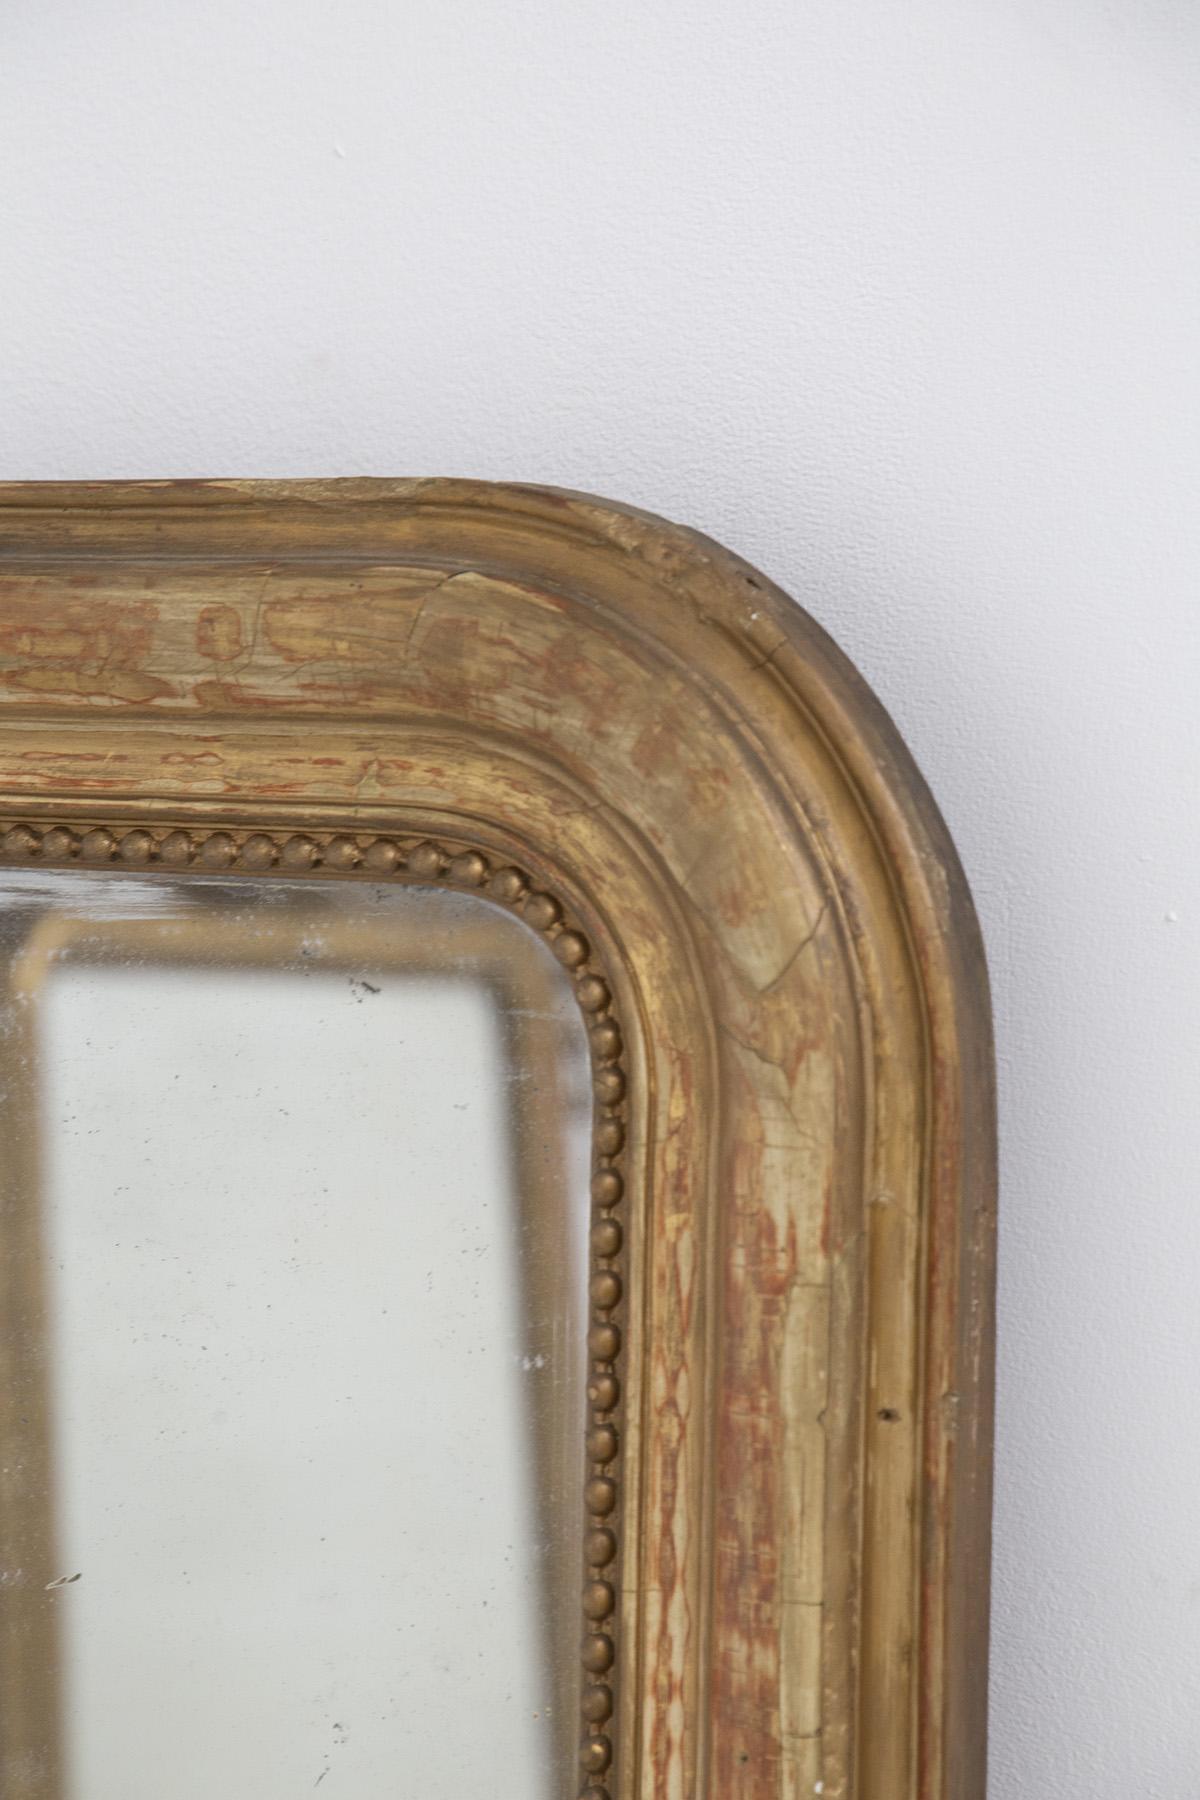 Splendid gilt wood wall mirror dating from the late 19th century, of fine Italian manufacture.
The mirror is made entirely of gilt wood, rectangular in shape with beveled corners at the sides. The frame is very beautiful and frames the actual